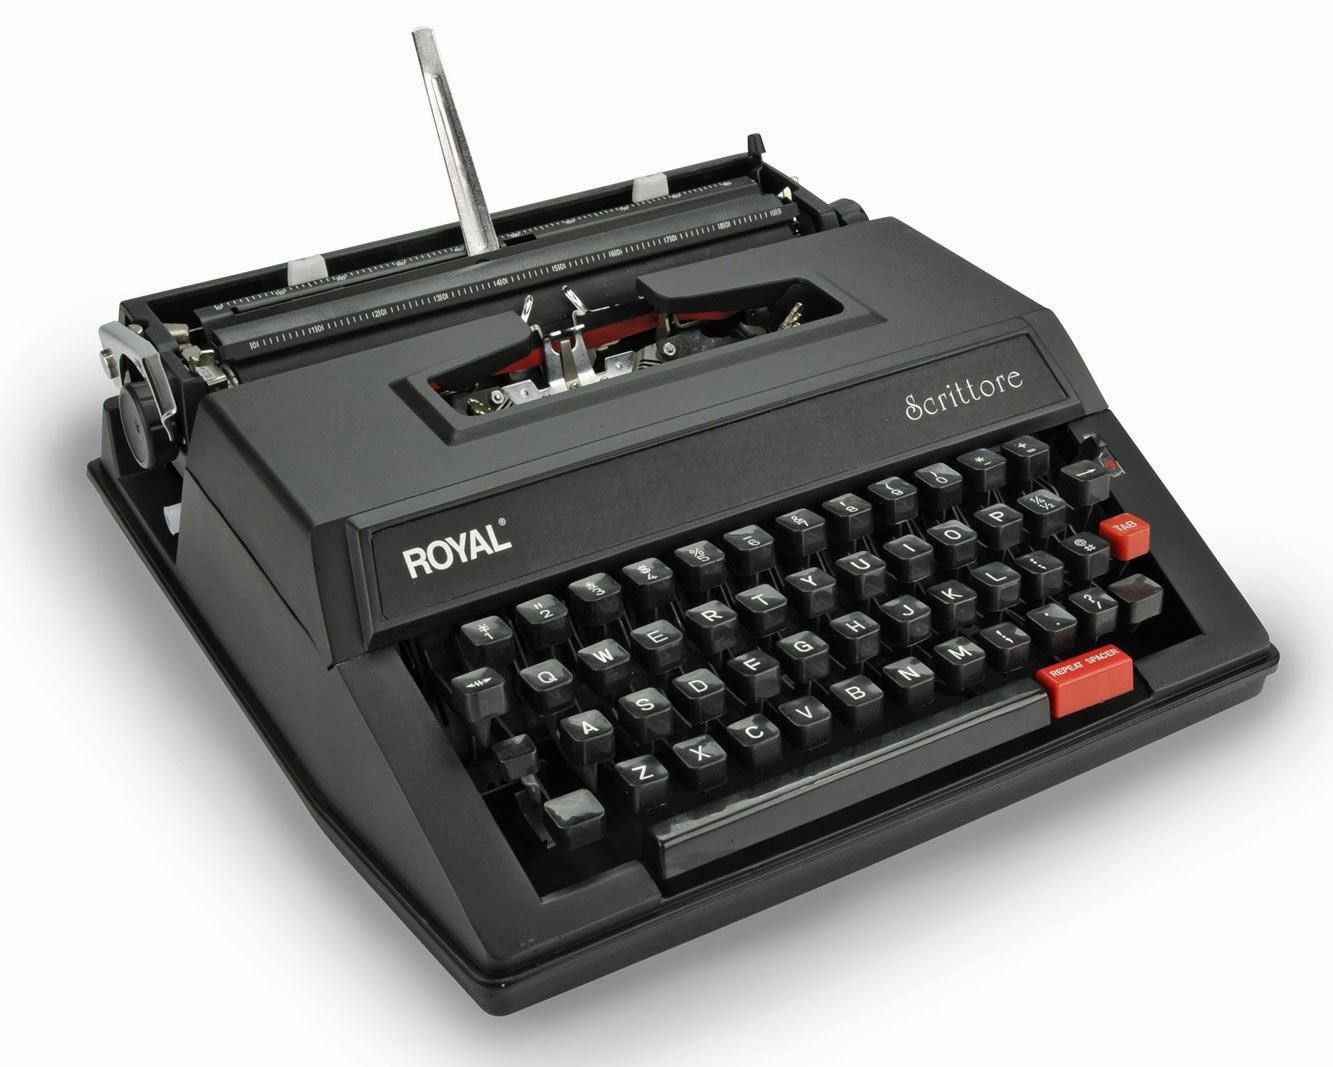 oz.Typewriter: Everything New in Portable Typewriters is Old Again